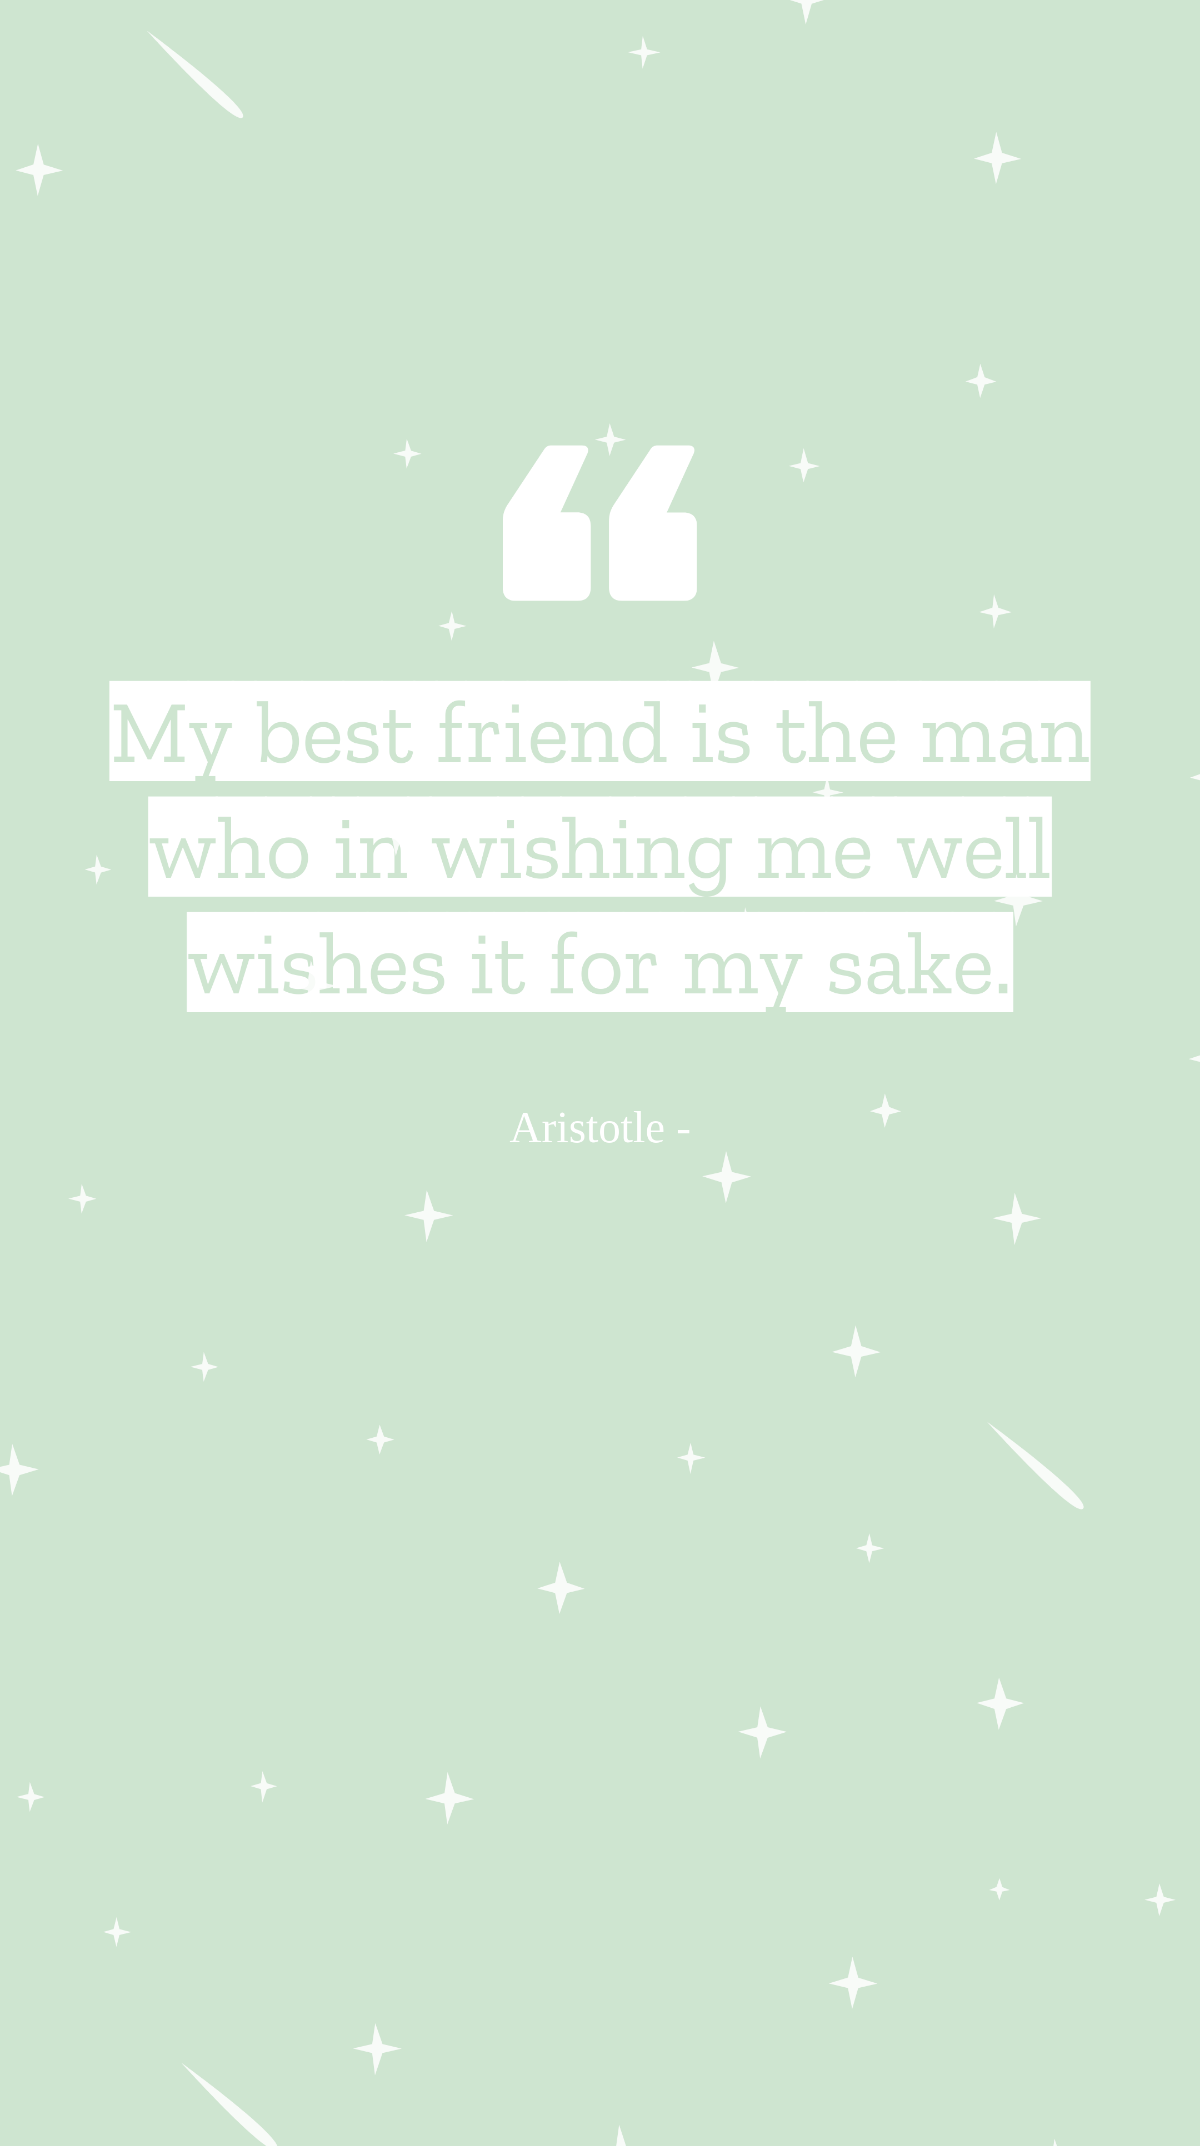 Aristotle - My best friend is the man who in wishing me well wishes it for my sake. Template